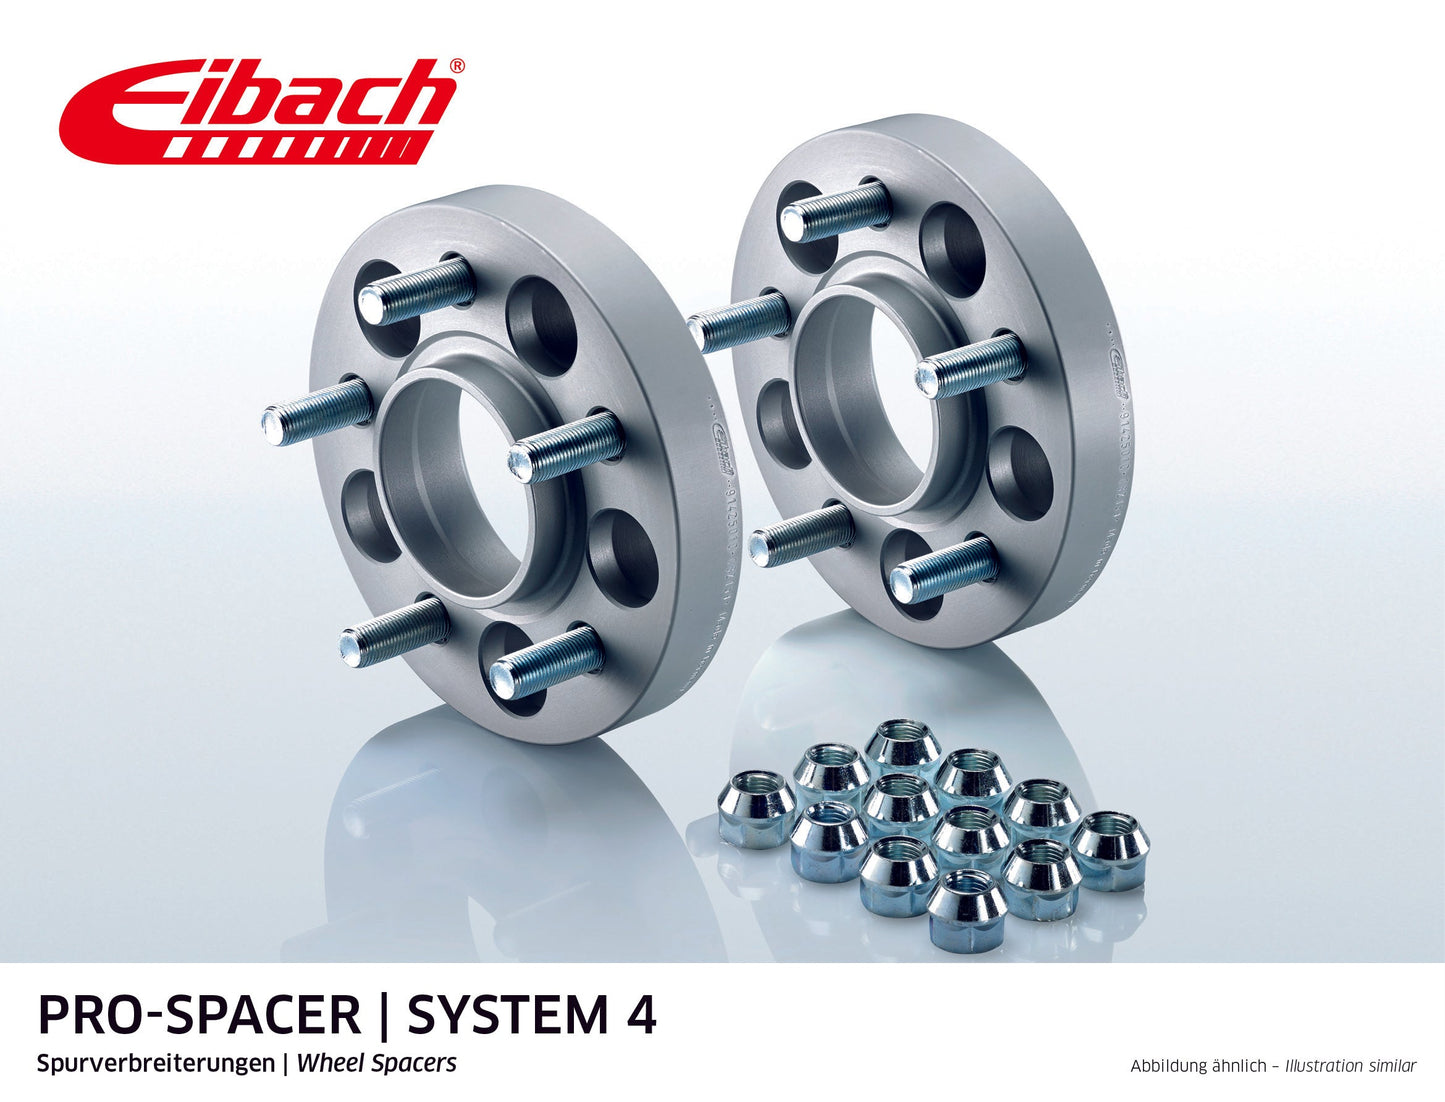 Eibach Pro-Spacer Kit (Pair Of Spacers) 30mm Per Spacer (System 4) S90-4-30-021 (Silver) at £176.66